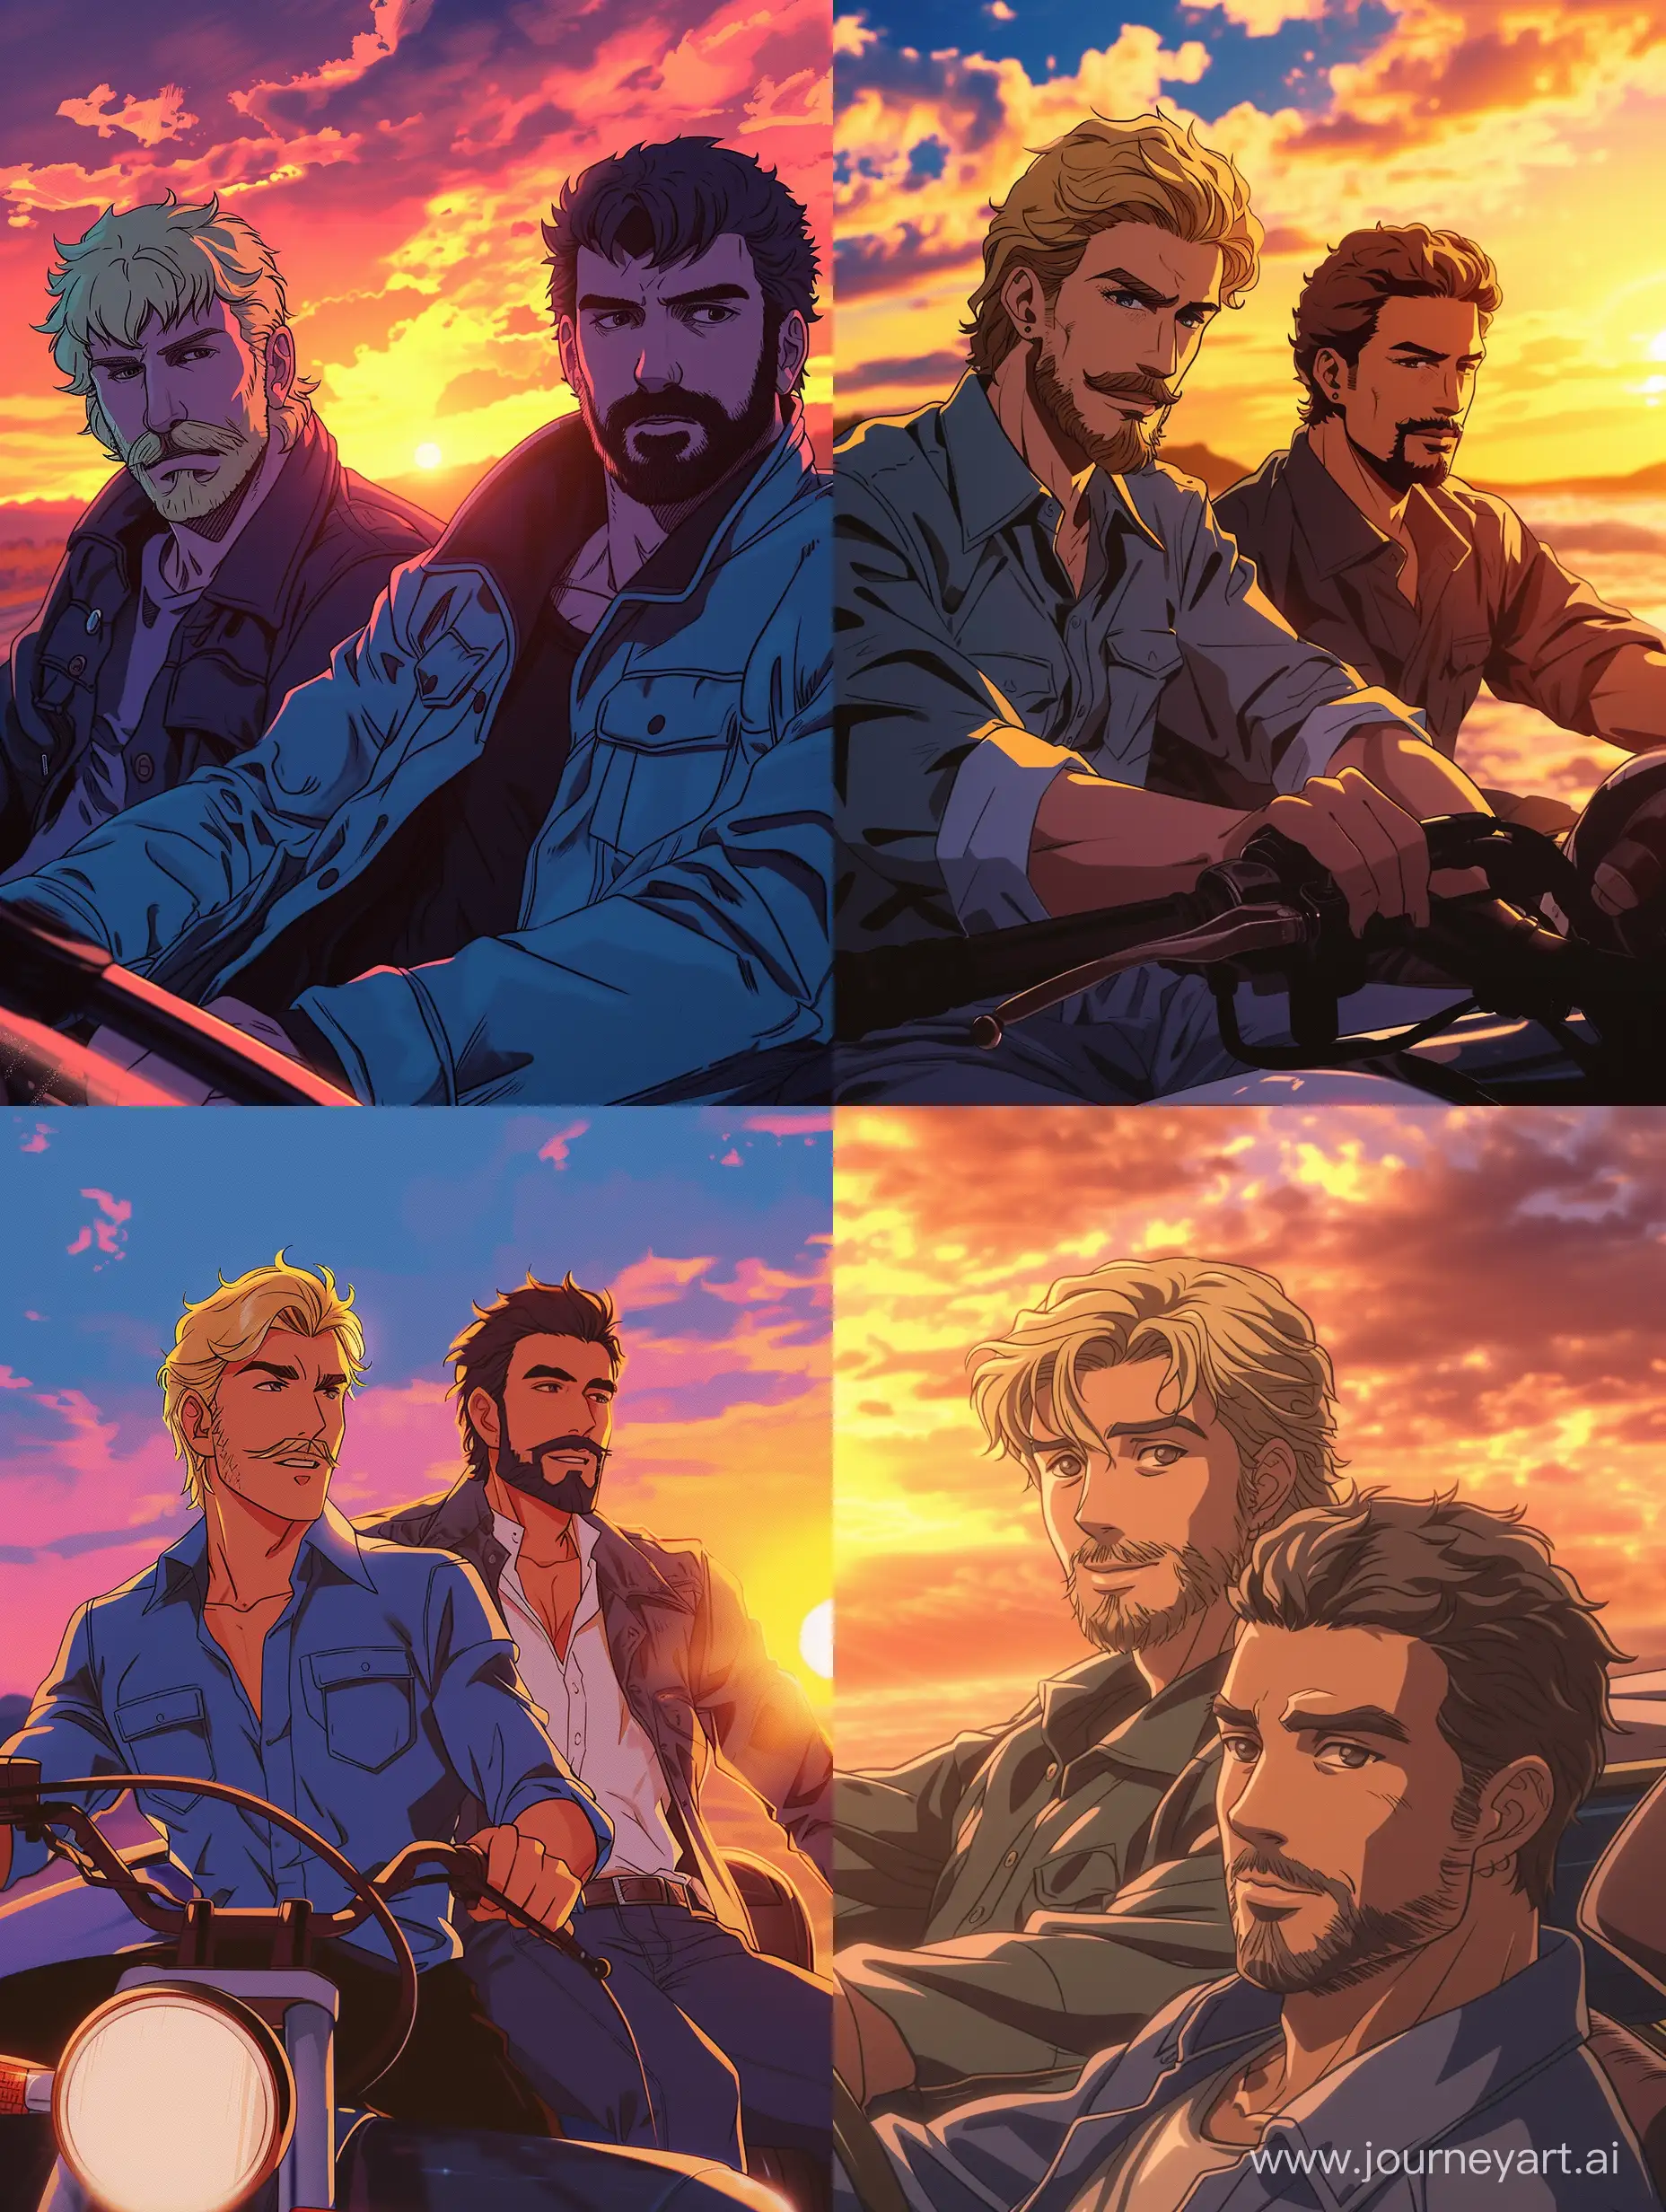 A guy with medium blonde hair and a moustache, a guy with a short dark hair and a beard are riding to the sunset in cabriolet 80s anime style